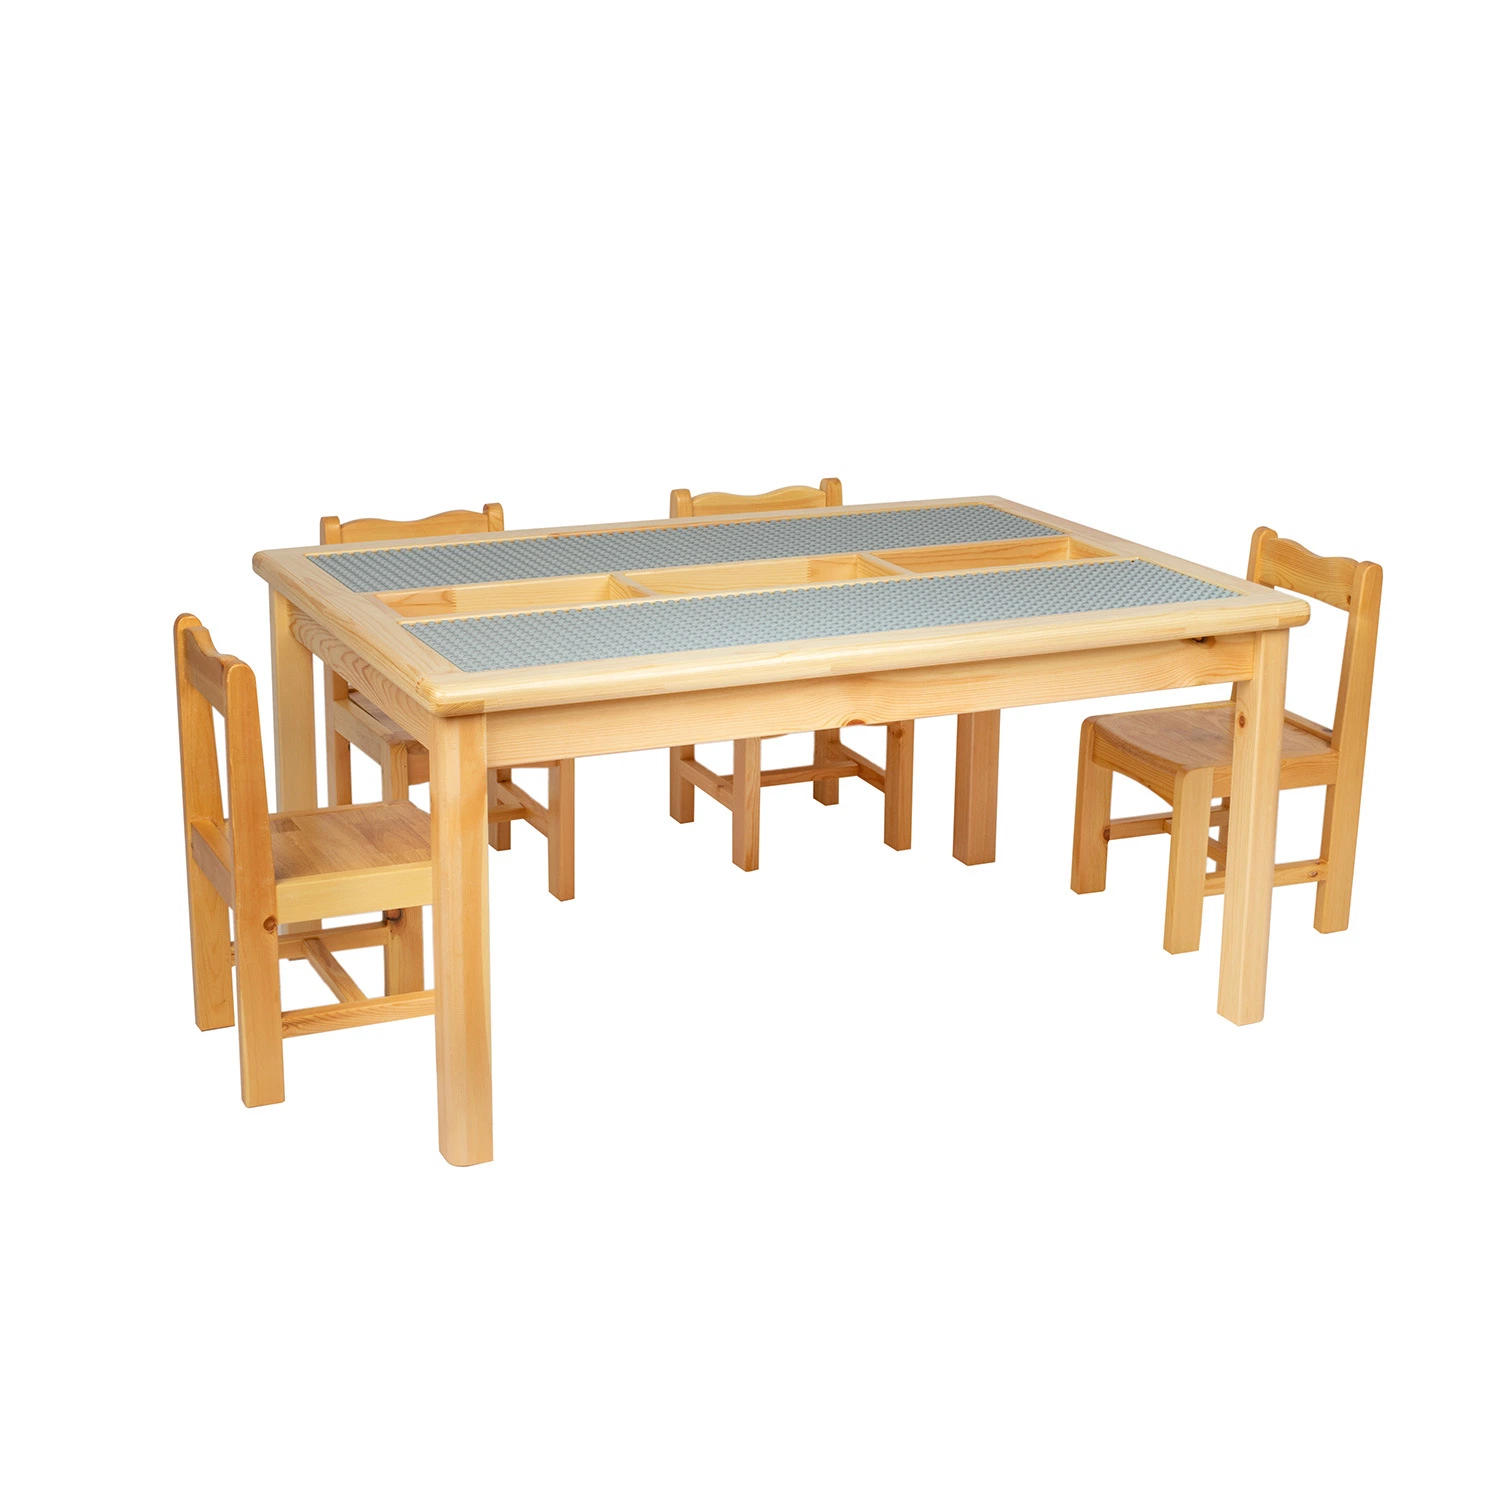 Multifunctional Learning and Playing Building Blocks Wooden Table